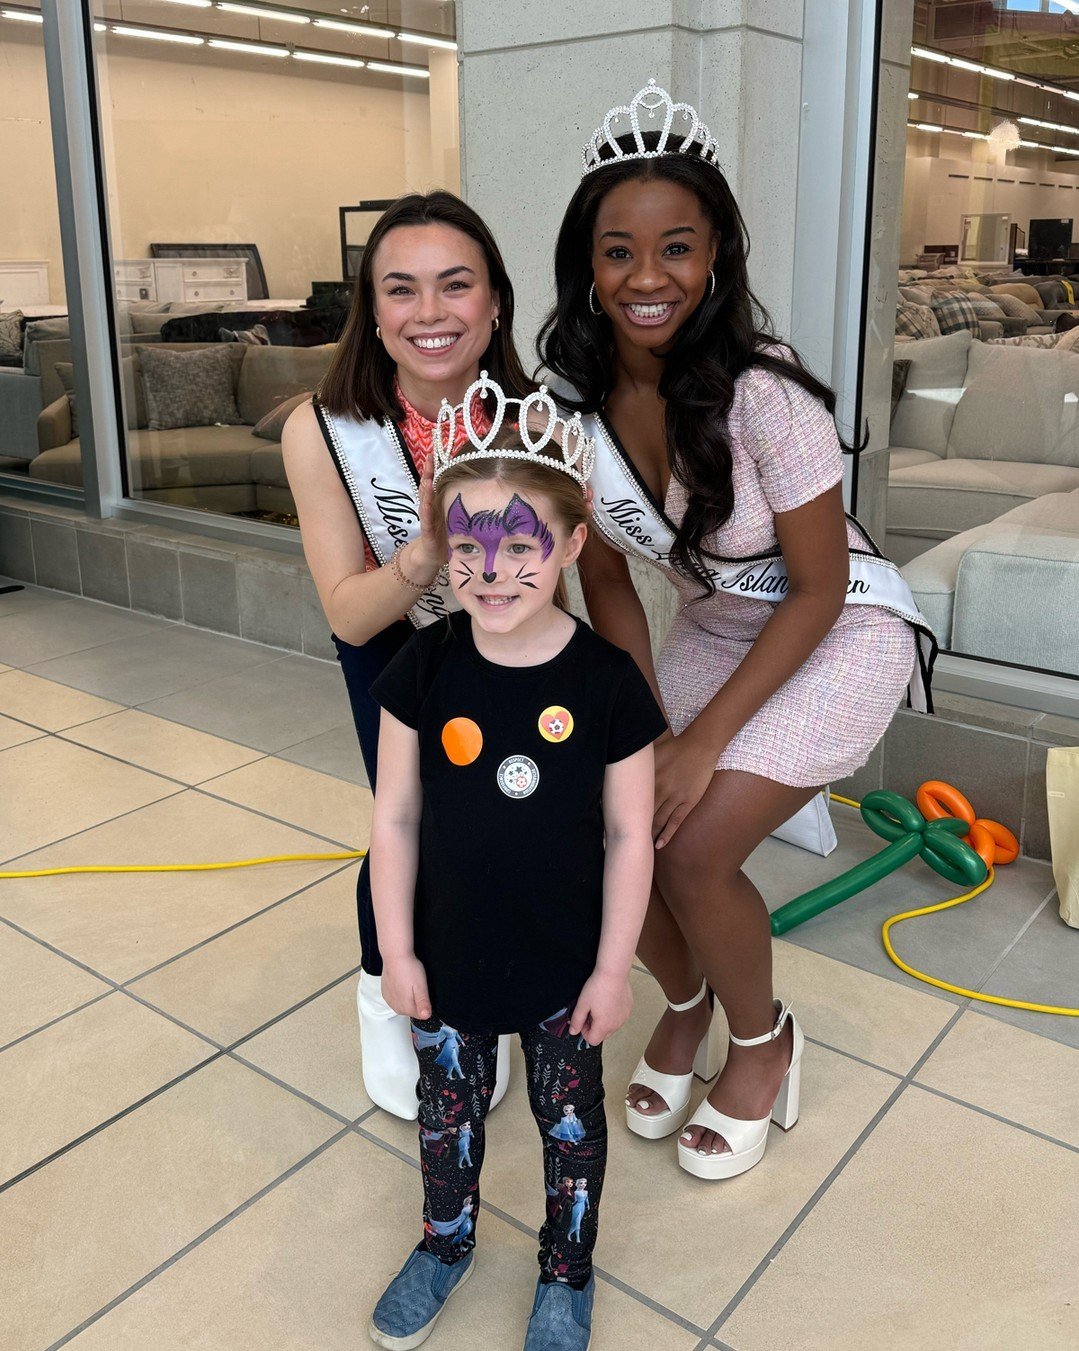 Such a fun time at the All Kids Fair earlier this month! Our queens had a great day inspiring others during the event! 

Thank you All Kids Fair for inviting us! 

👑👑👑 

#misslongisland #misslongislandteen #misslongislandpageants #longislandqueens